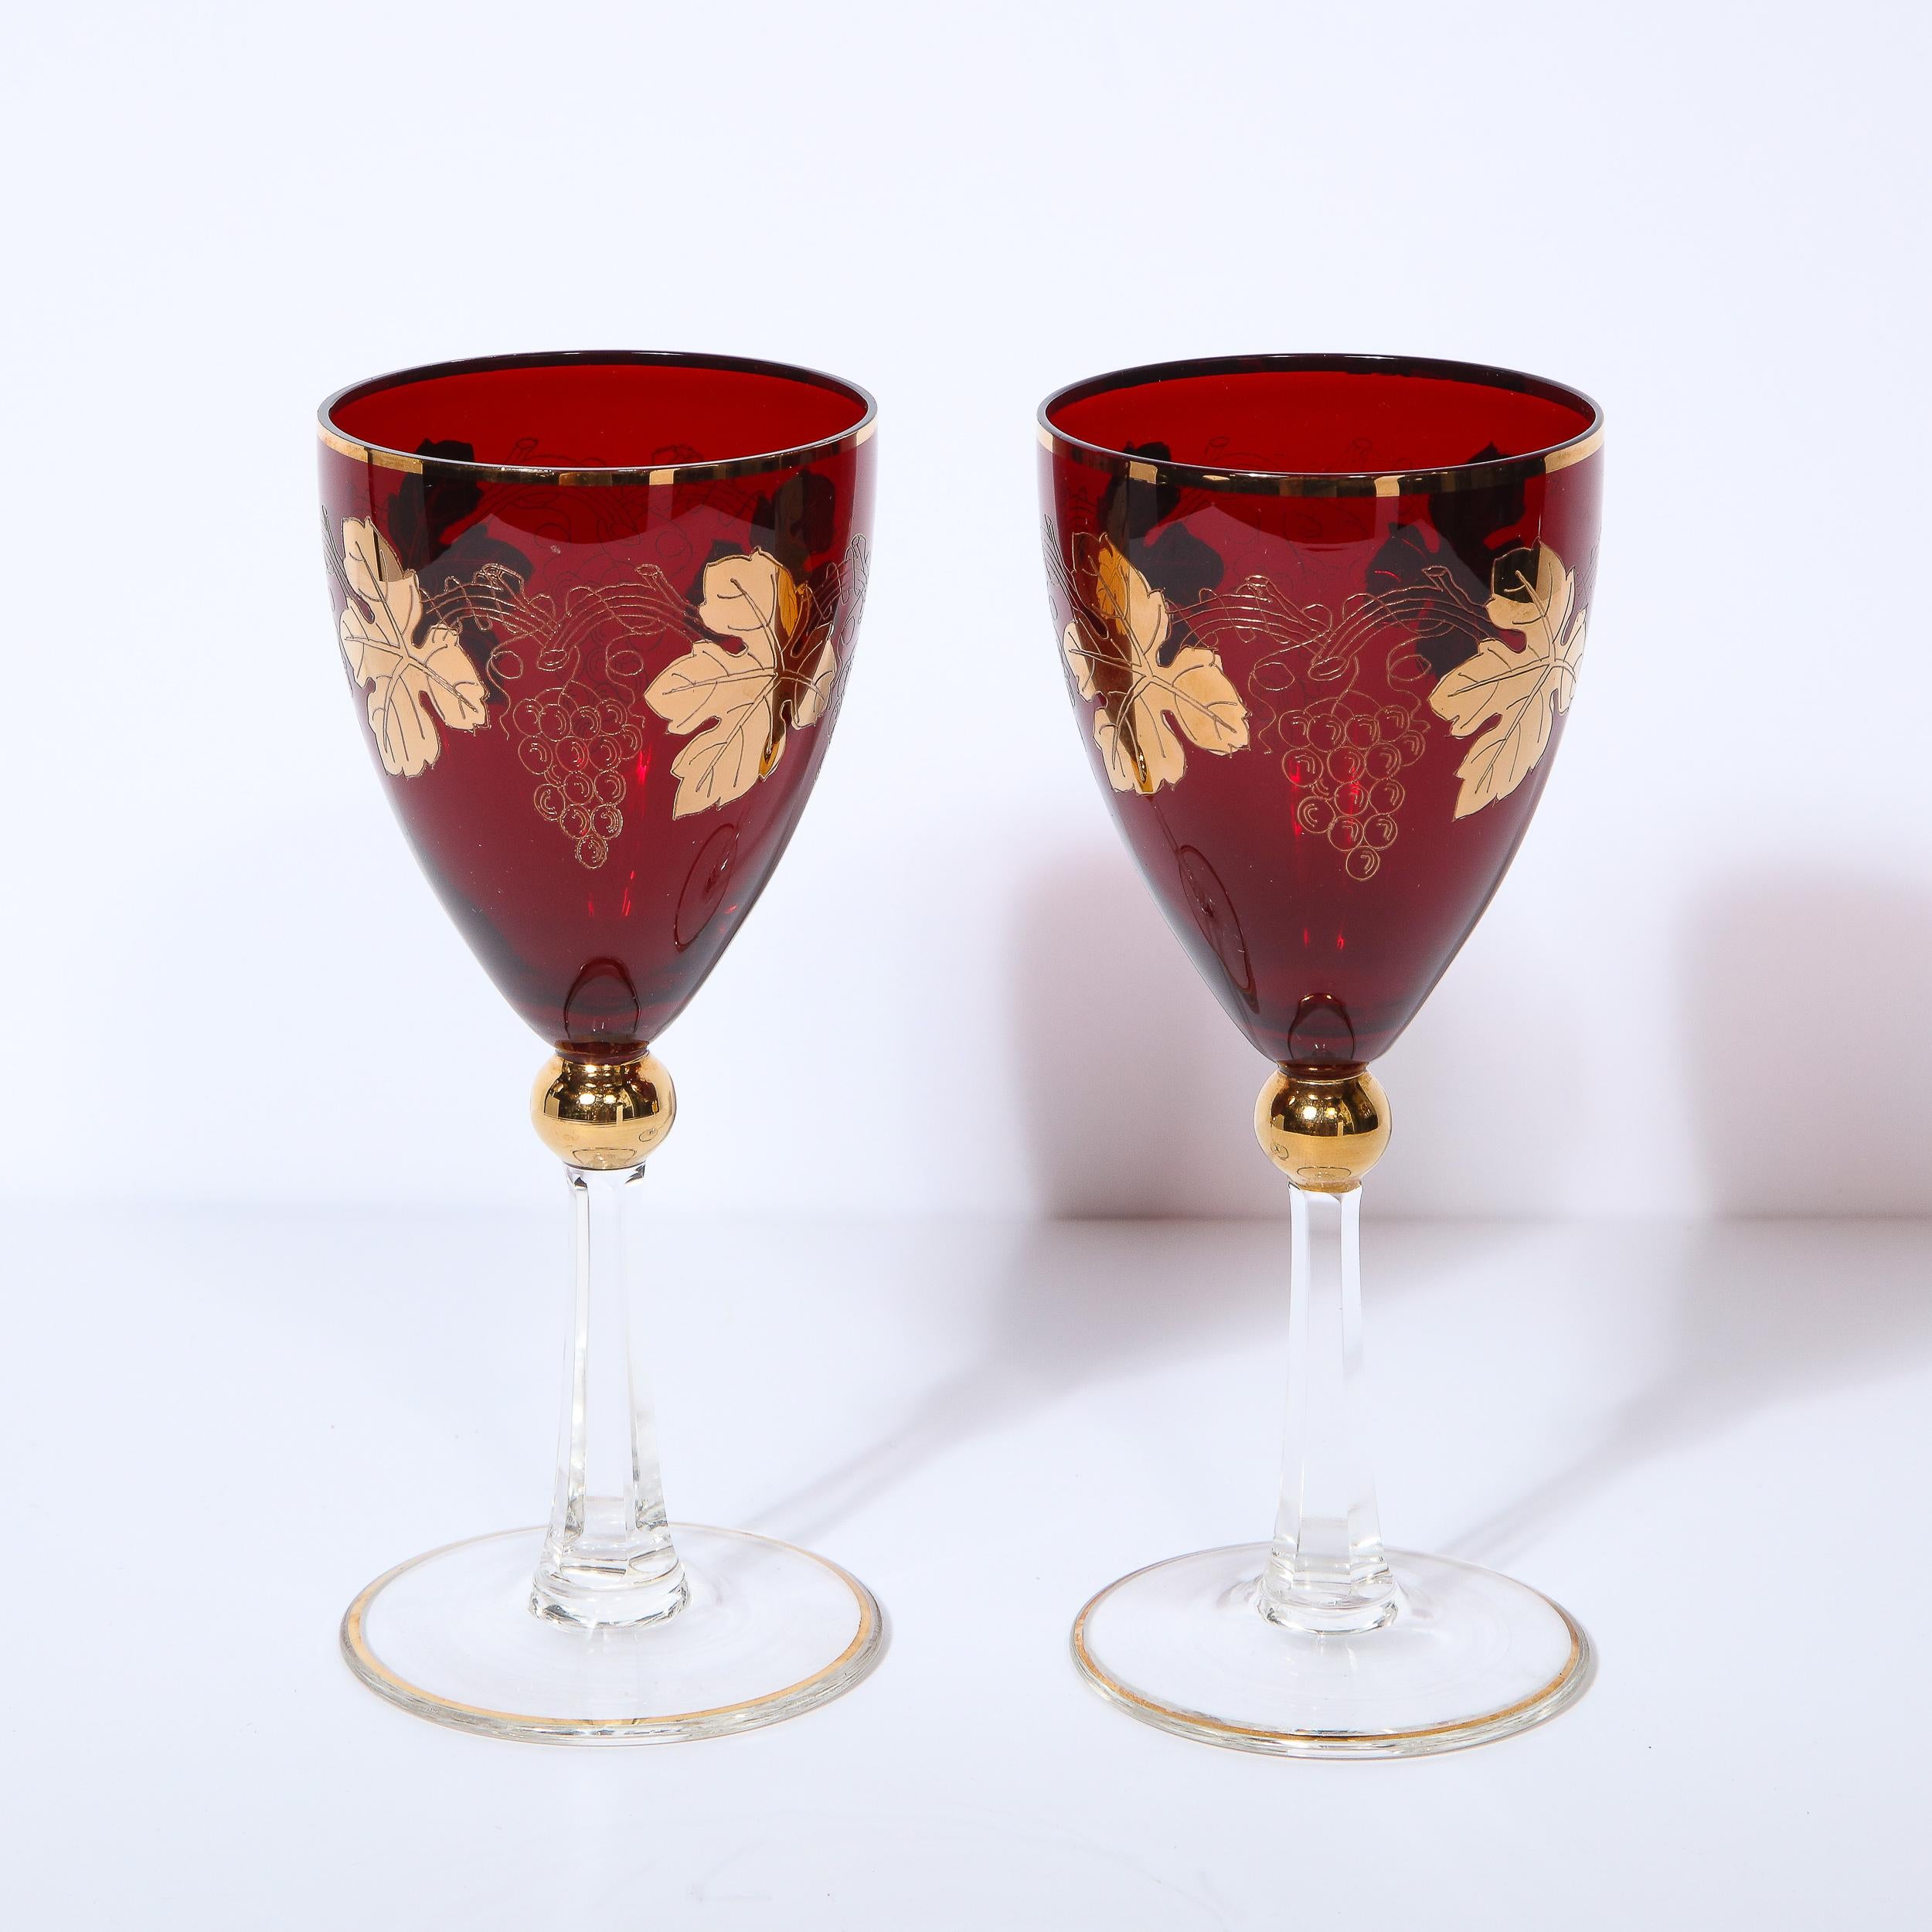 This stunning set of eight Art Deco wine glasses were realized in the United States circa 1940. They feature circular bases and faceted stems in translucent glass capped with spherical embellishment overlaid in 24kt gold. The chalice is fabricated